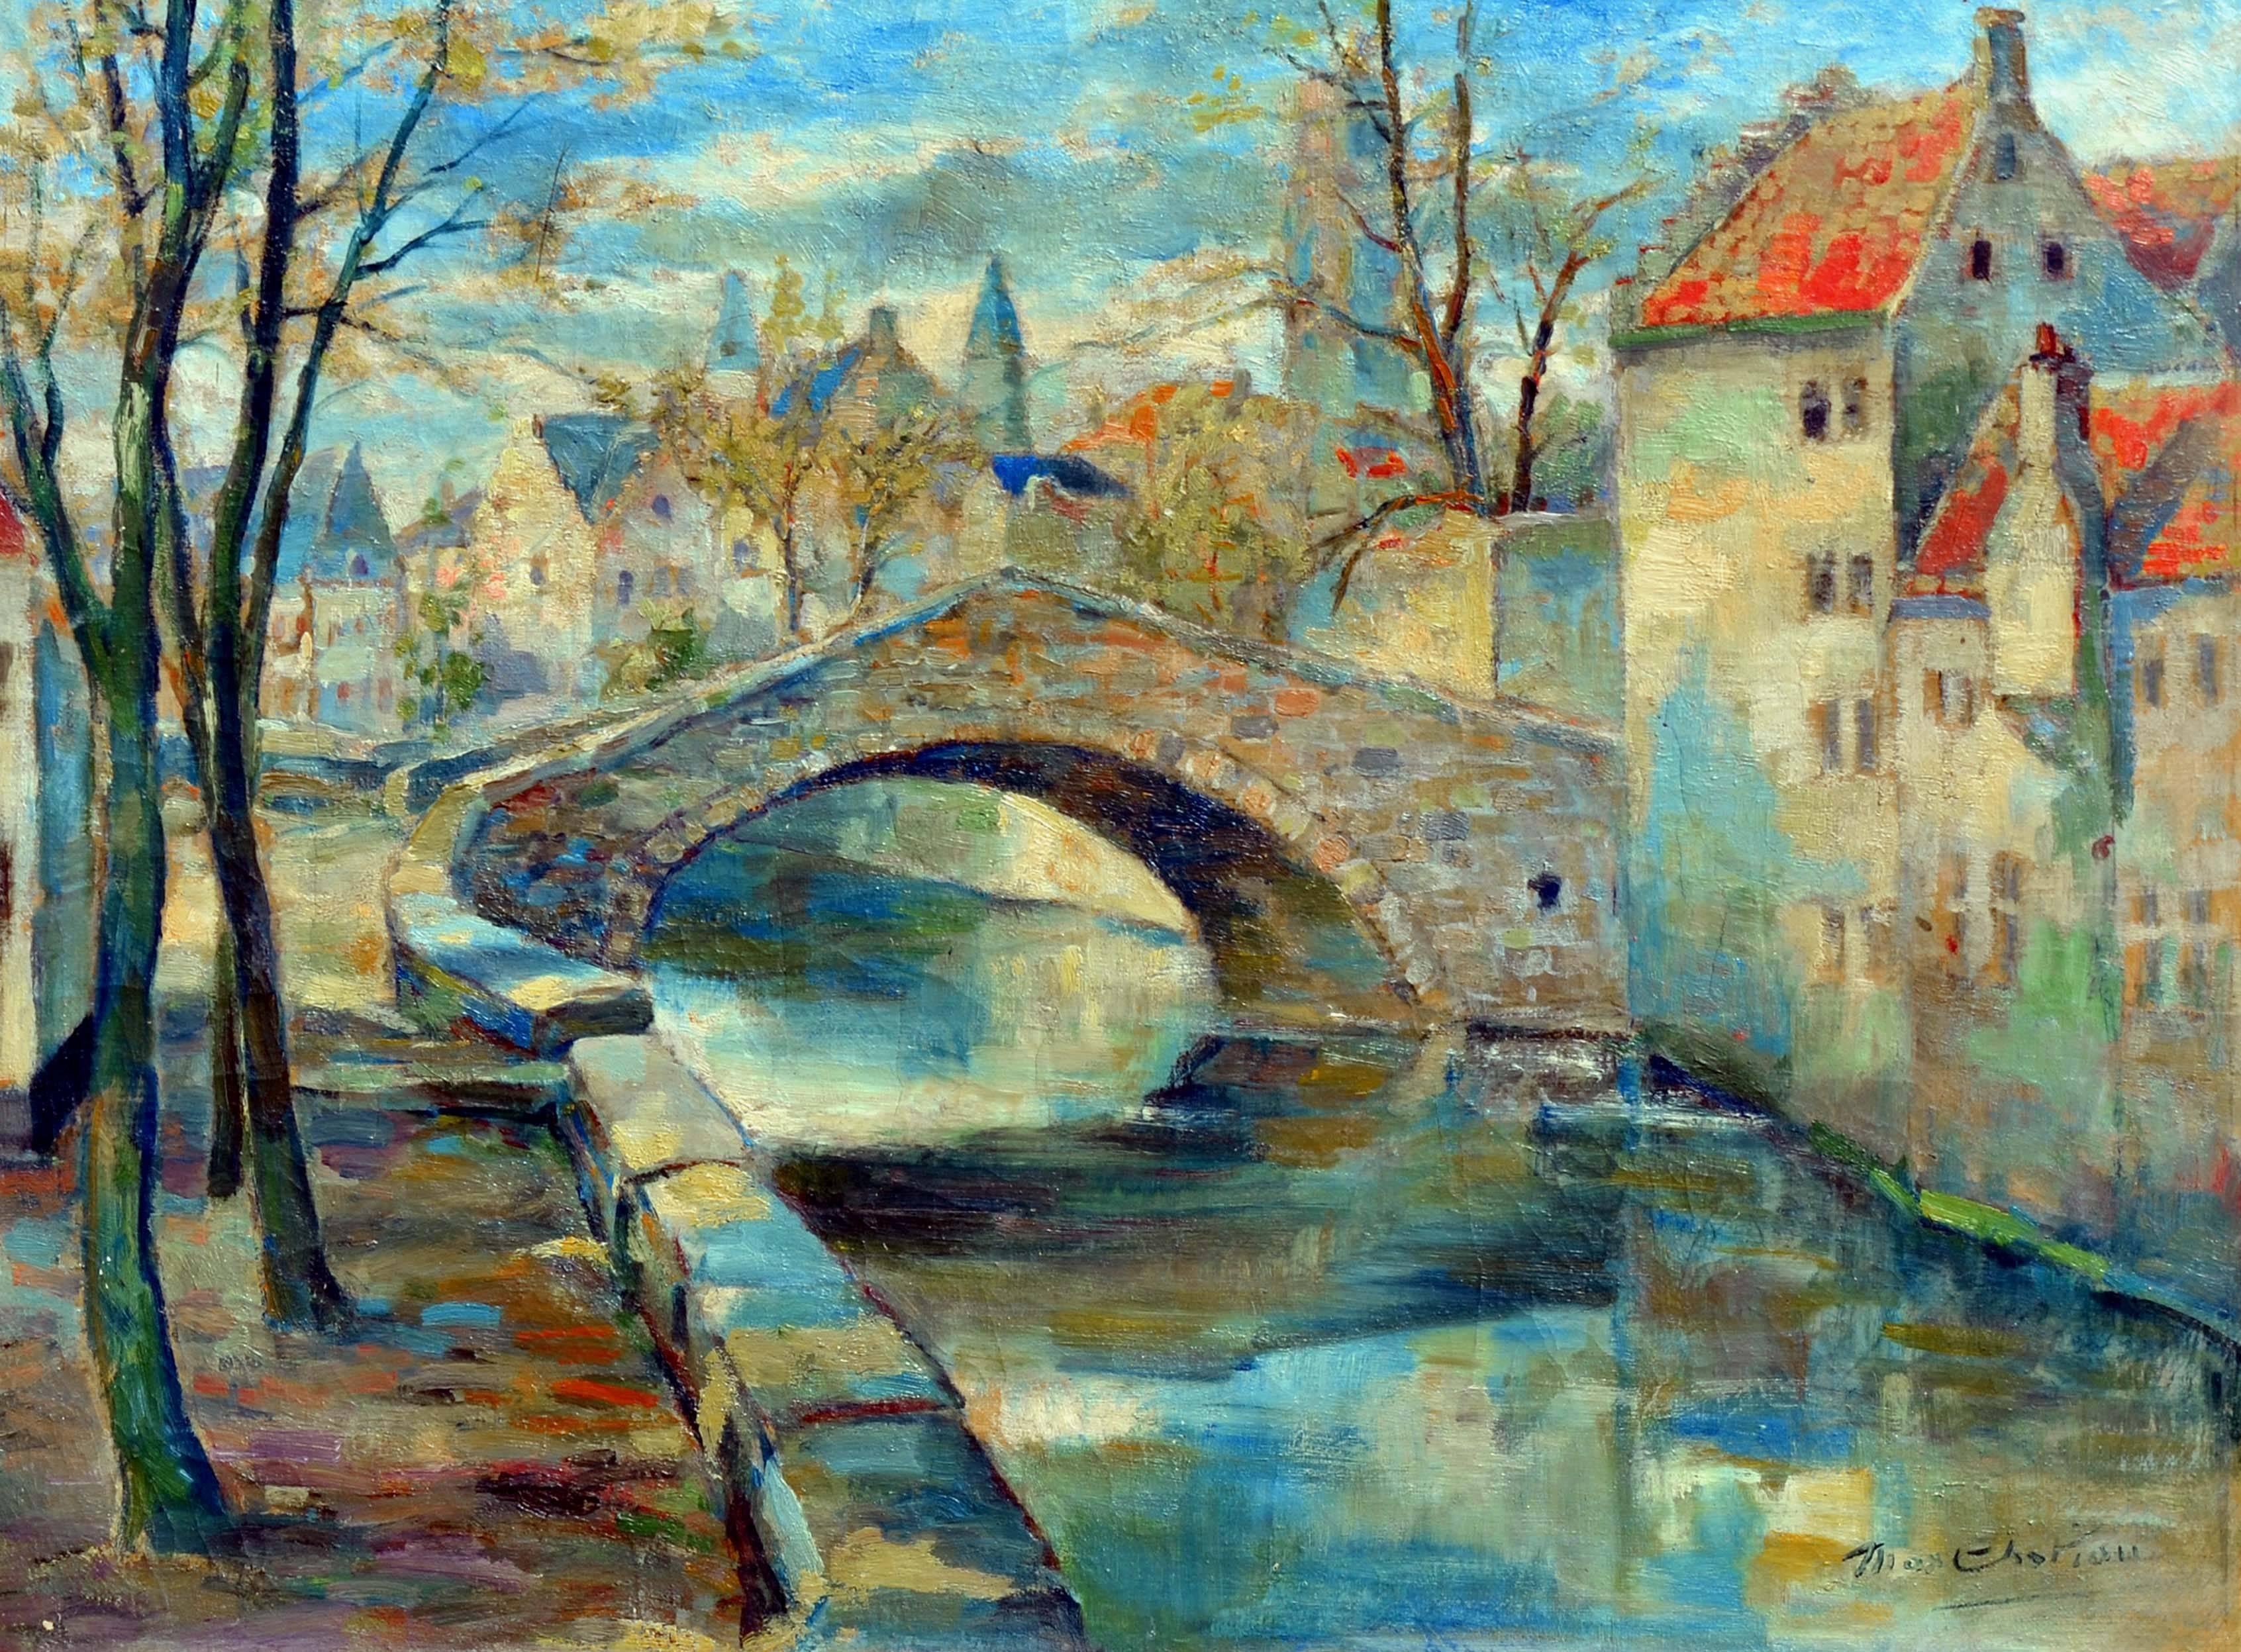 1940s Bruges, Belgium Fauvist Landscape - Painting by Max Chatiau